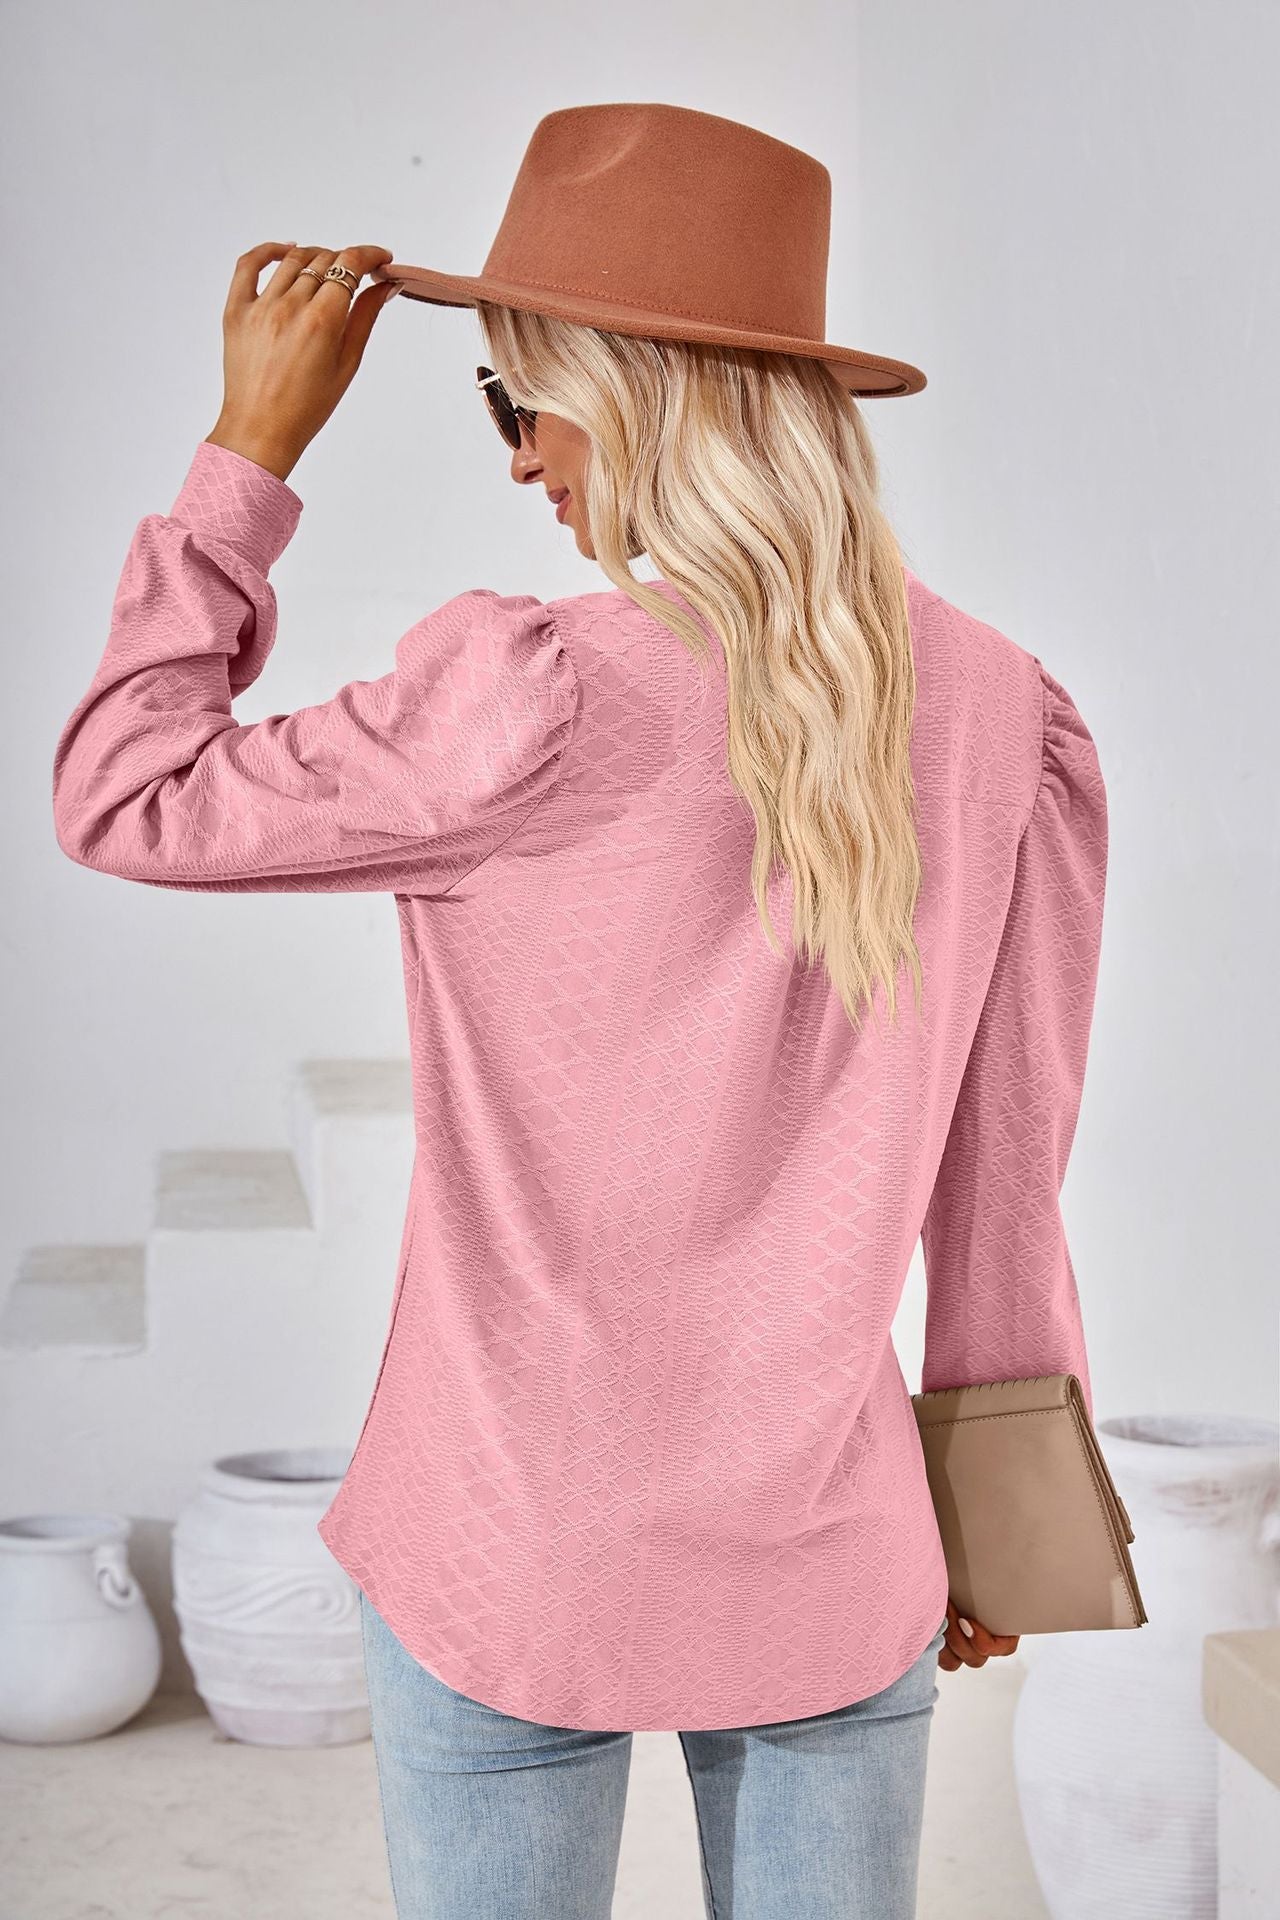 Autumn Winter Solid Color V neck Jacquard Long Sleeve Loose-Fitting T-shirt Top Ladies